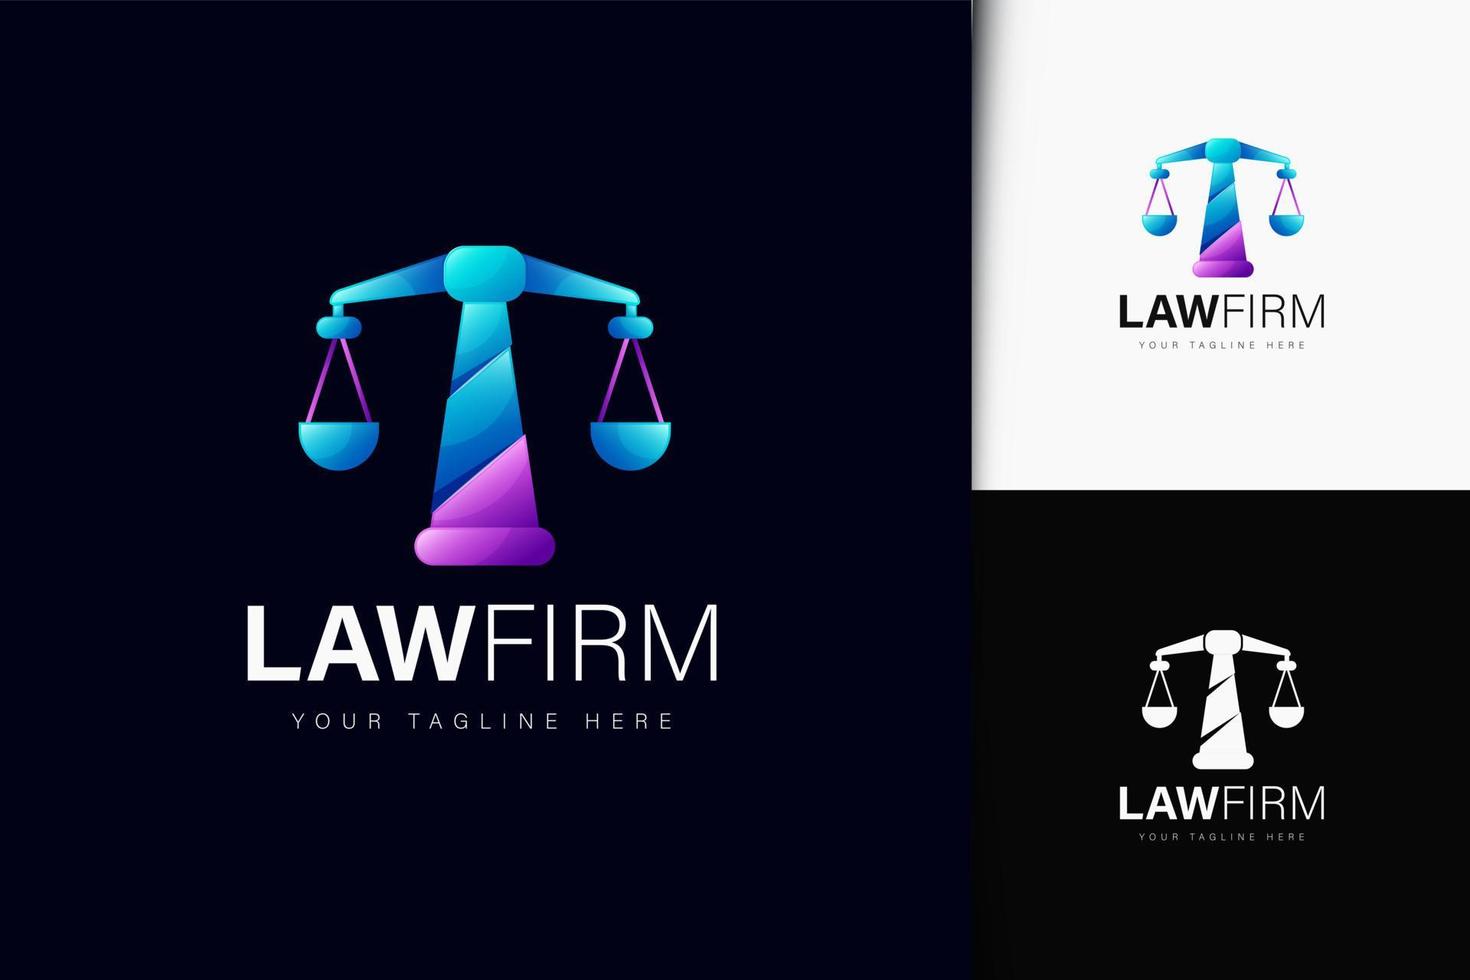 Law firm logo design with gradient vector